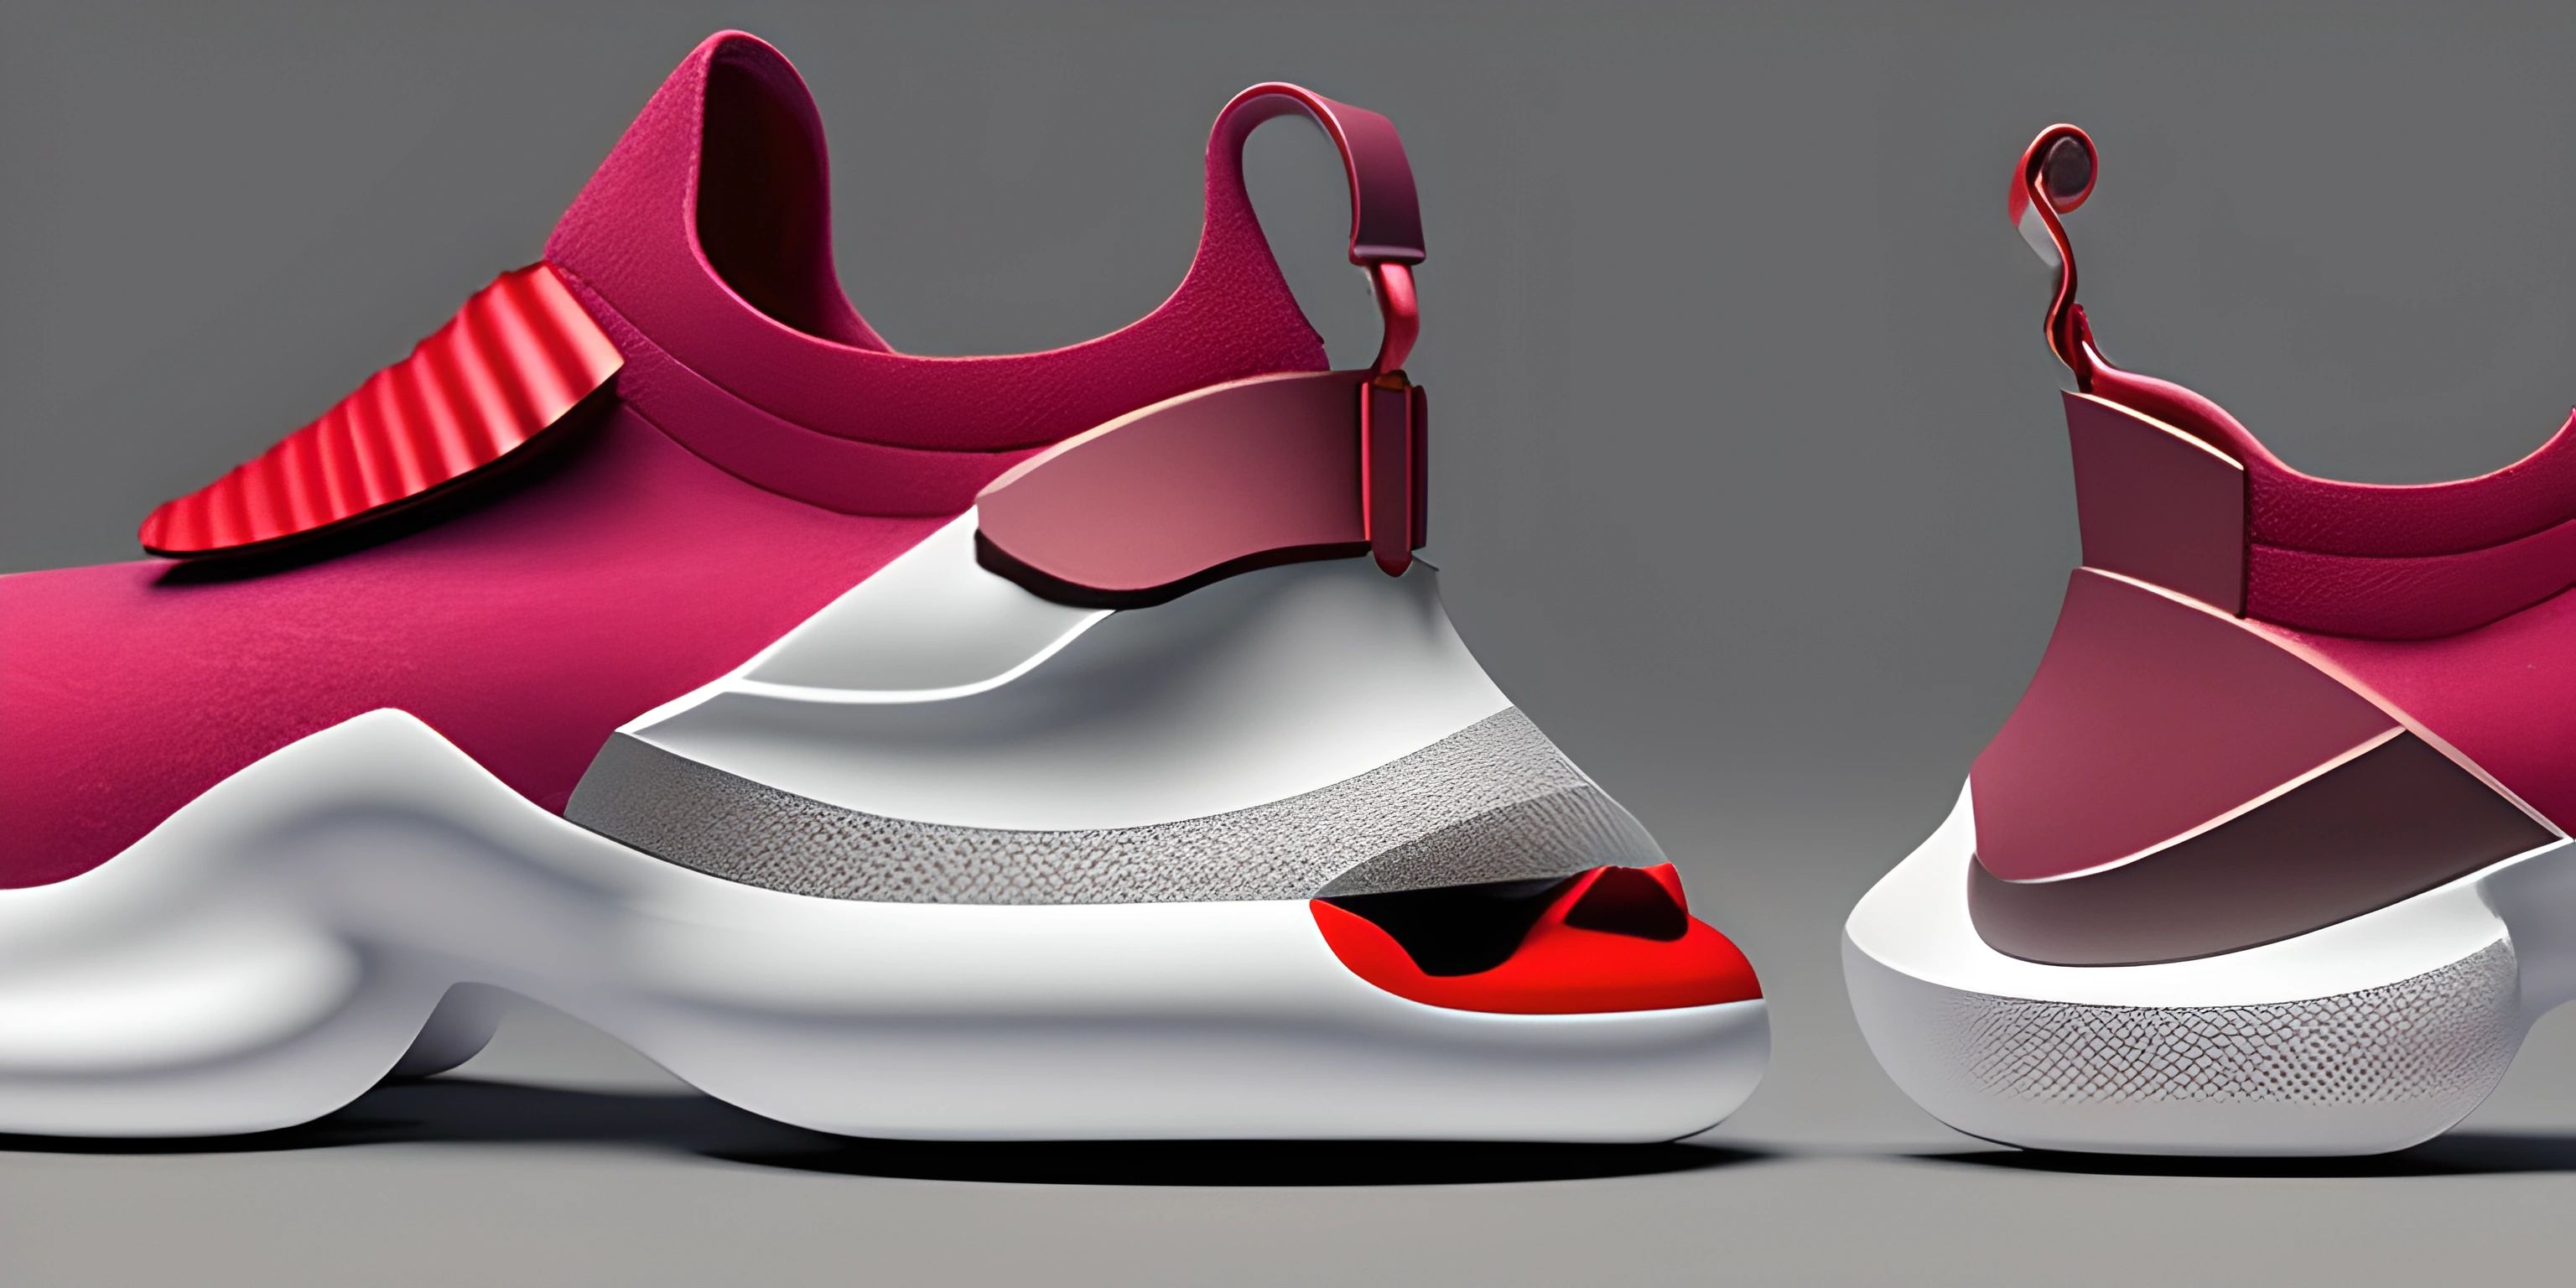 a pair of sneakers on a gray surface with a pink shoe and red shoes inside the shoe